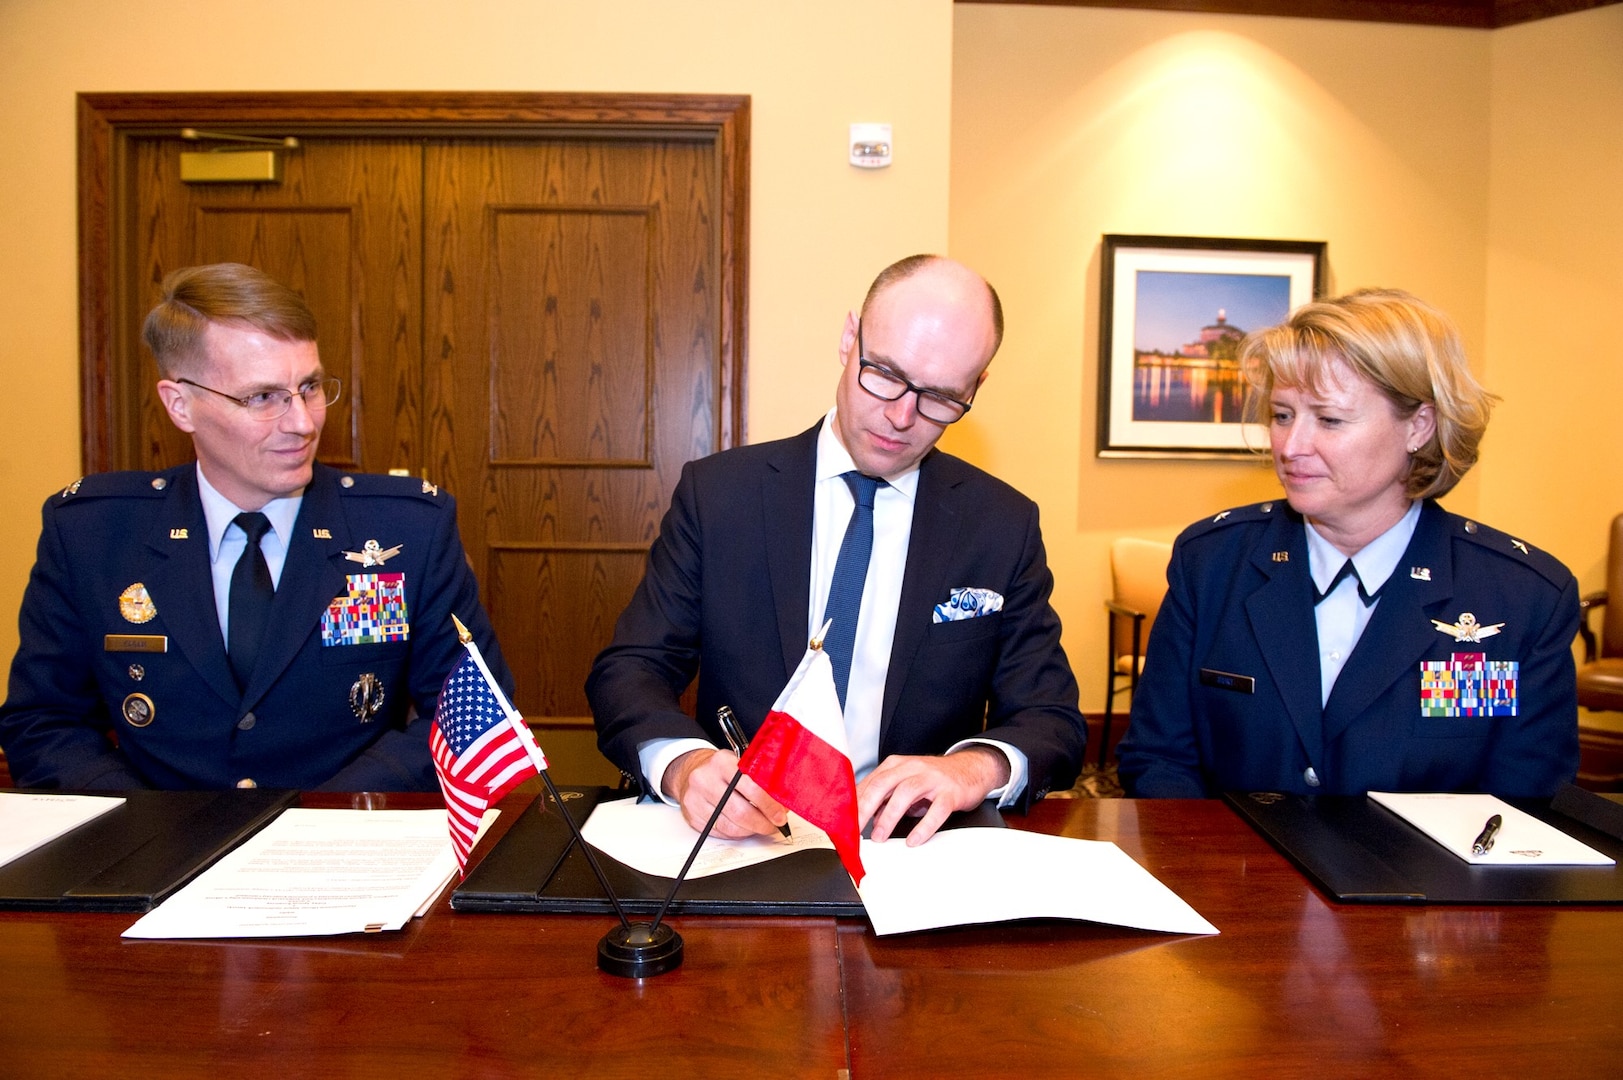 Michal Szaniawski, acting president of the Polish Space Agency, signs an agreement for space situational awareness (SSA) services and data as U.S. Space representative U.S. Air Force Col. Christopher Eagan (left), chief of Policy Division, U.S. Strategic Command (USSTRATCOM), and U.S. Air Force Brig. Gen.  Deanna Burt, director of Operations and Communications, U.S. Air Force Space Command, witnessed the signing. Szaniawski signed the agreement as part of a larger effort to support spaceflight planning and enhance the safety, stability and sustainability of space operations. Poland joins 18 nations, two intergovernmental organizations, and 77 commercial satellite owners, operators, launchers already participating in SSA data-sharing agreements with USSTRATCOM.